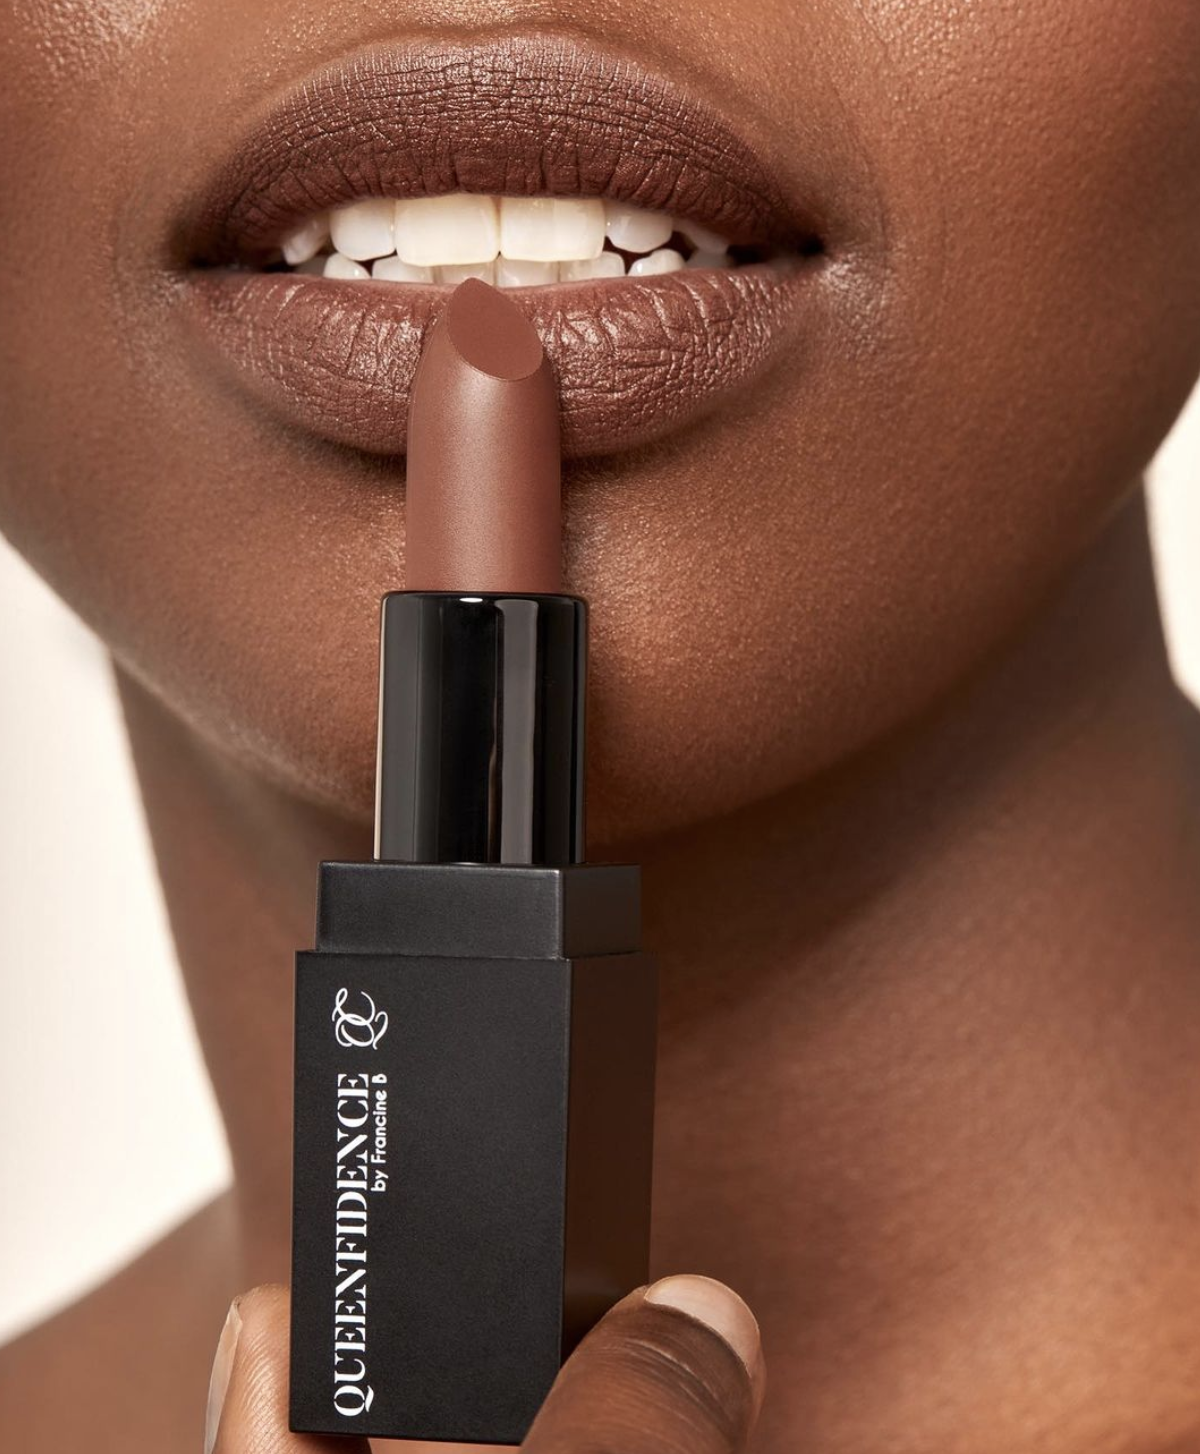 Black woman holds a brown lipstick against her lips. The lipstick container reads &quot;QUEENFIDENCE.&quot;